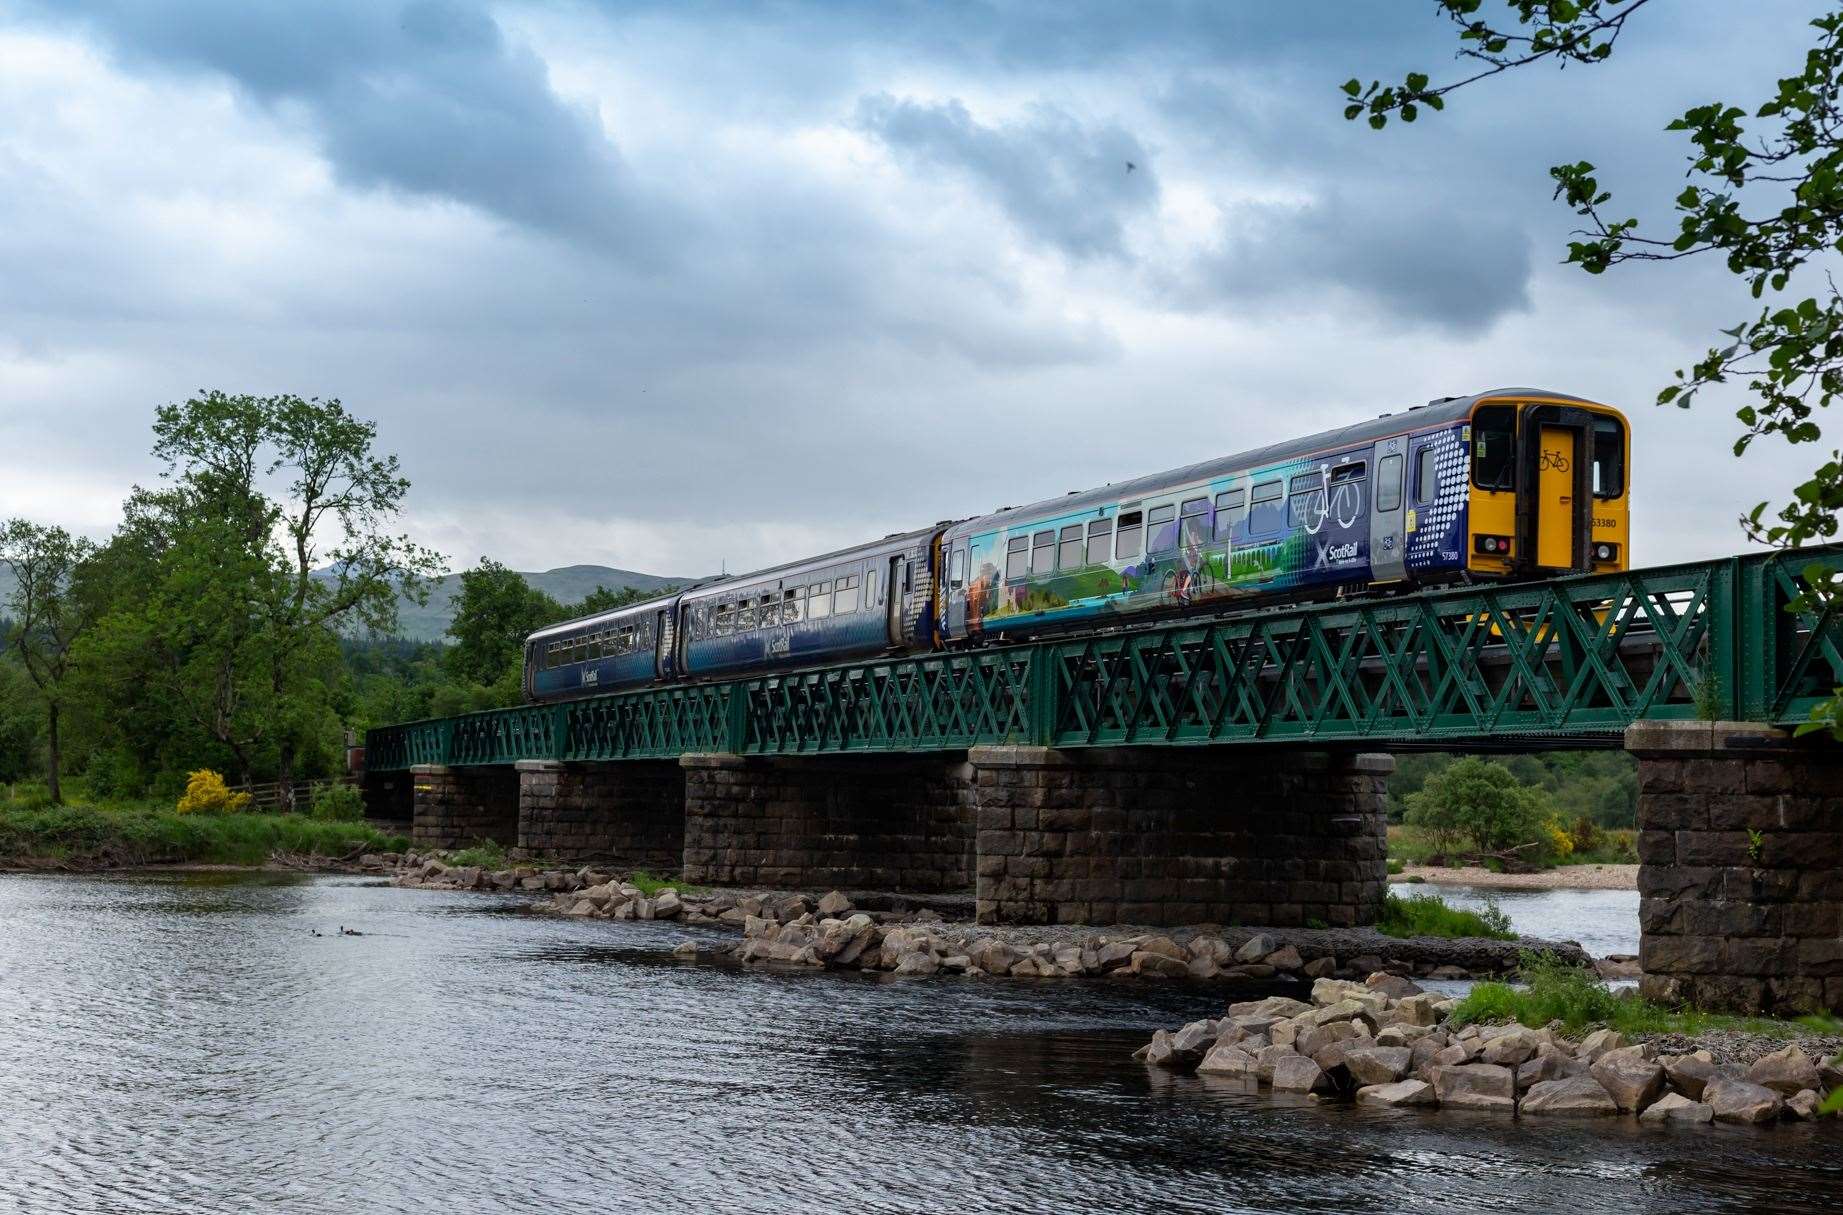 The revamped Highland Explorer Class 153 trains have been operating on the West Highland Line since 2021, but hopes similar revamps of Class 158 trains on the Kyle or Far North Lines appear to have been dashed.